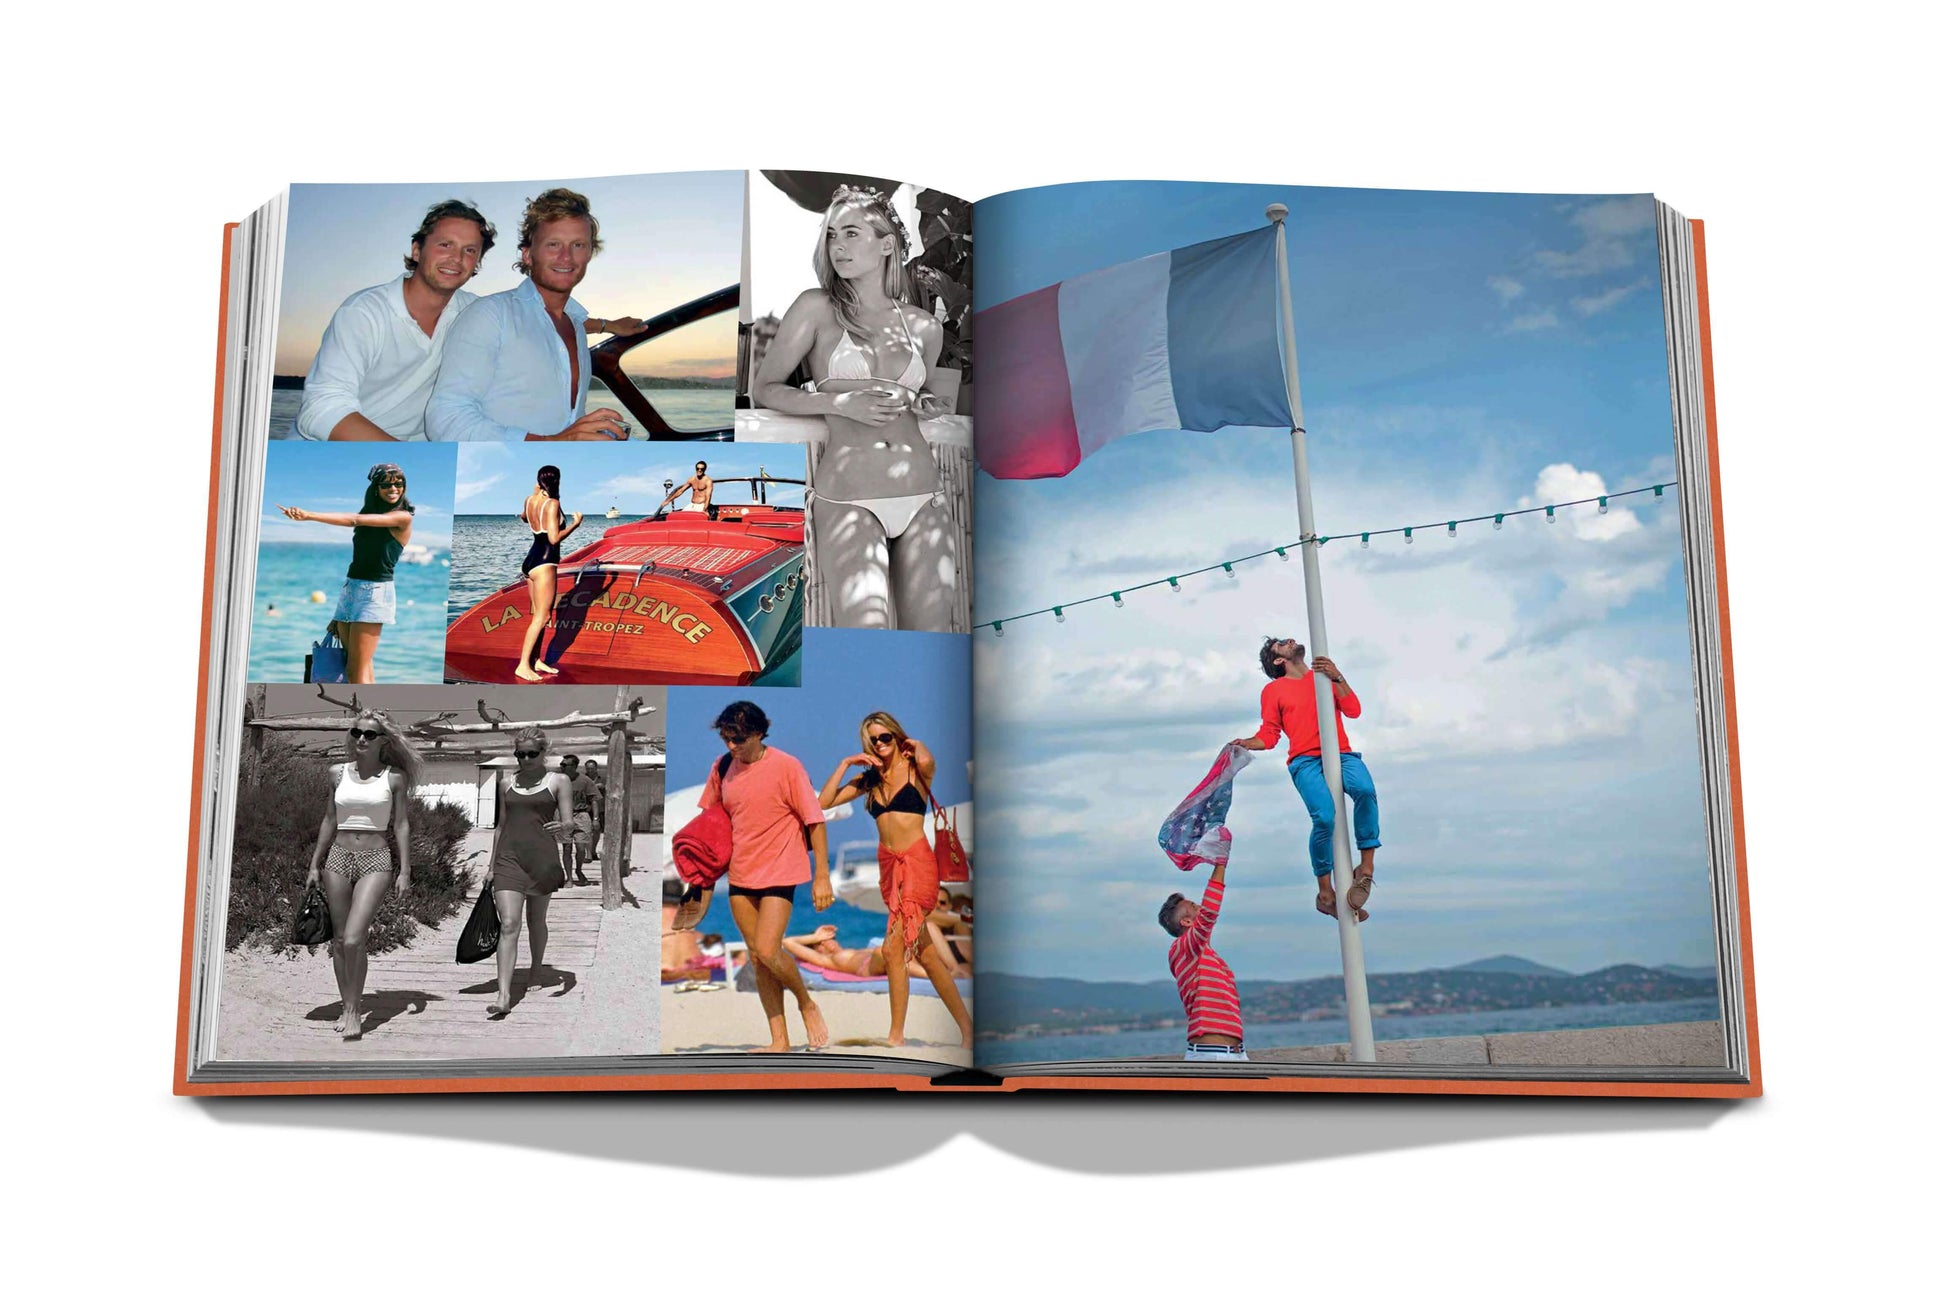 St. Tropez Soleil Coffee Table Book by Assouline - Haven